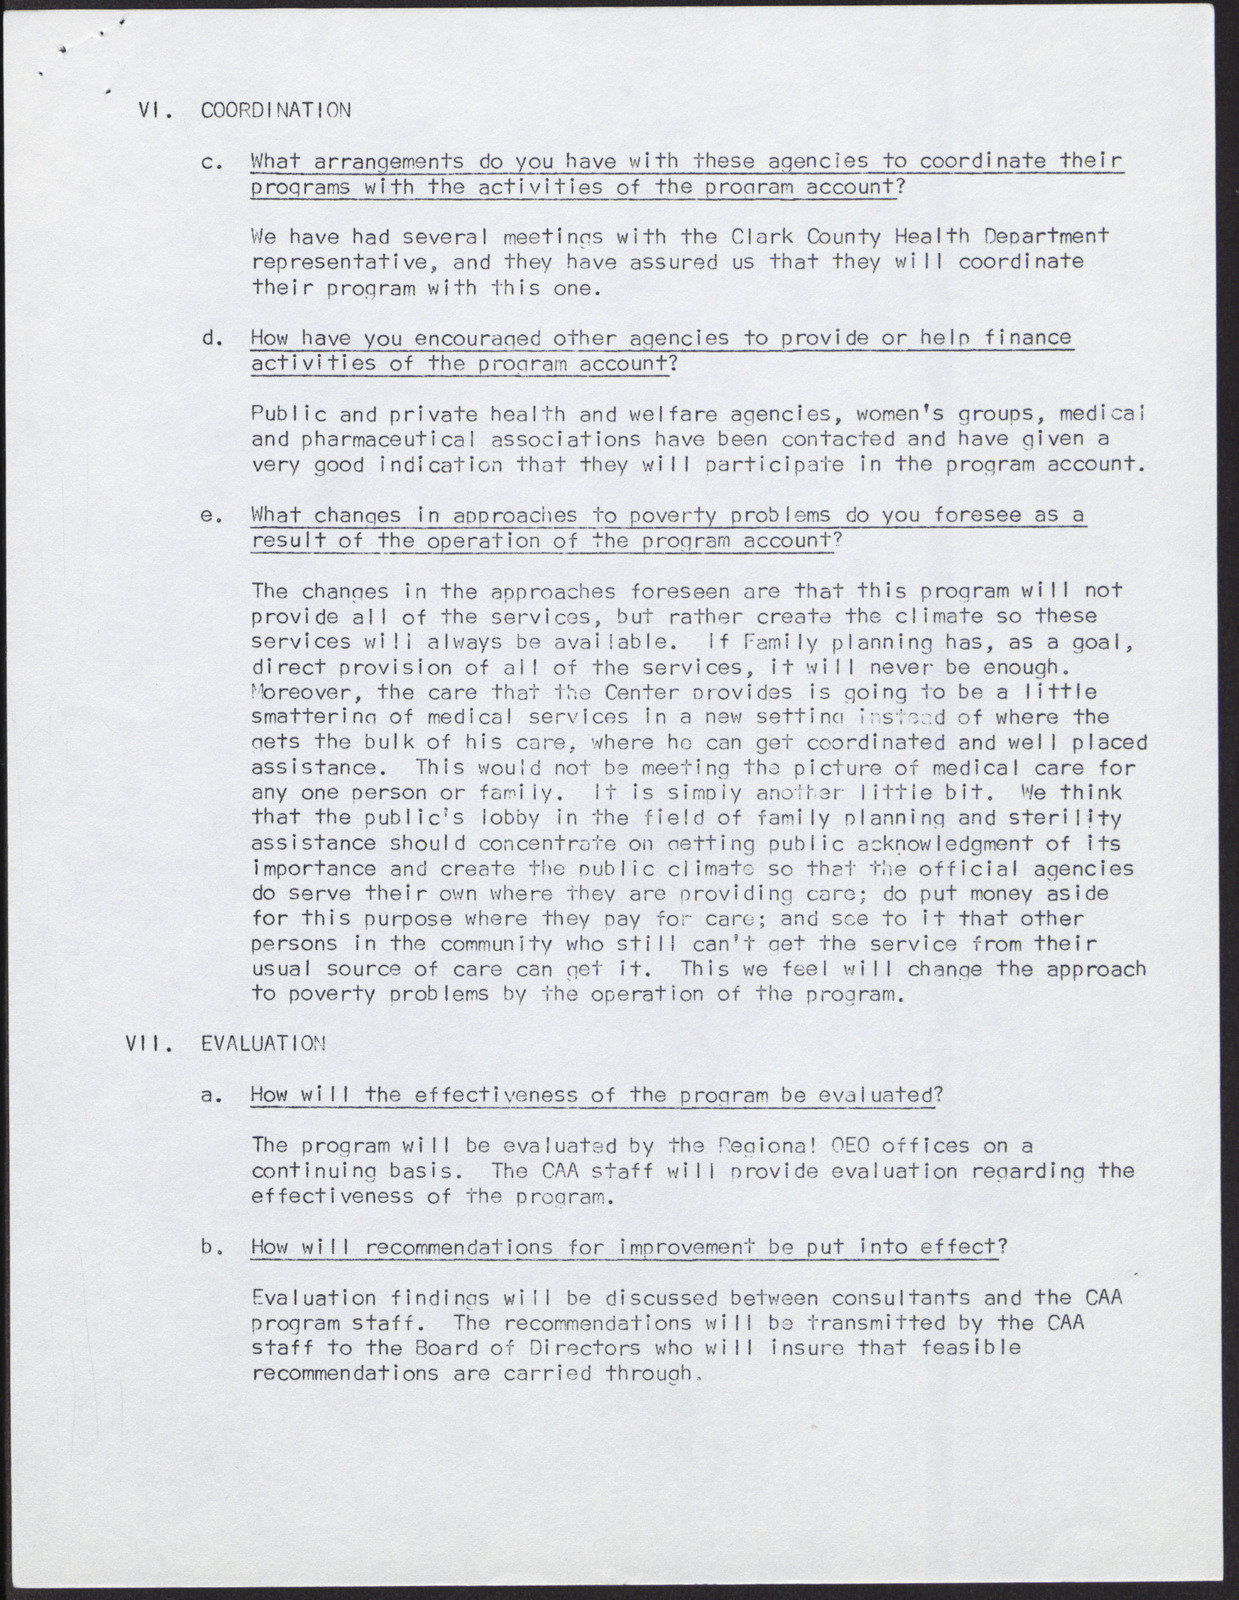 United Fund of Clark County, Inc. Manual of Operations (8 pages, possibly out of sequence or unrelated), no date, page 8